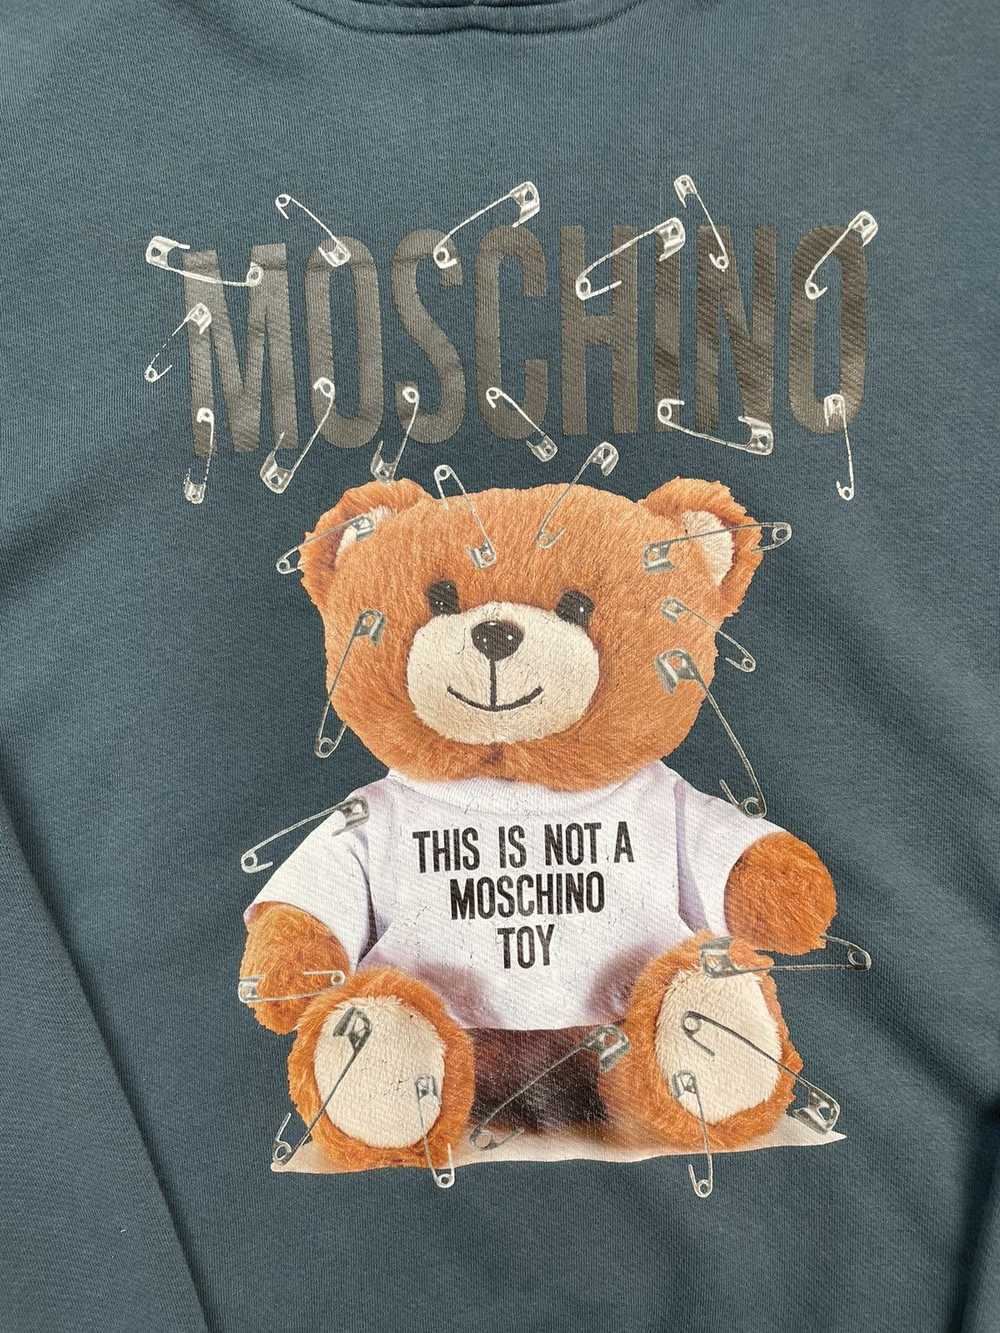 Moschino Moschino Teddy Bear This is Not A Moschi… - image 5